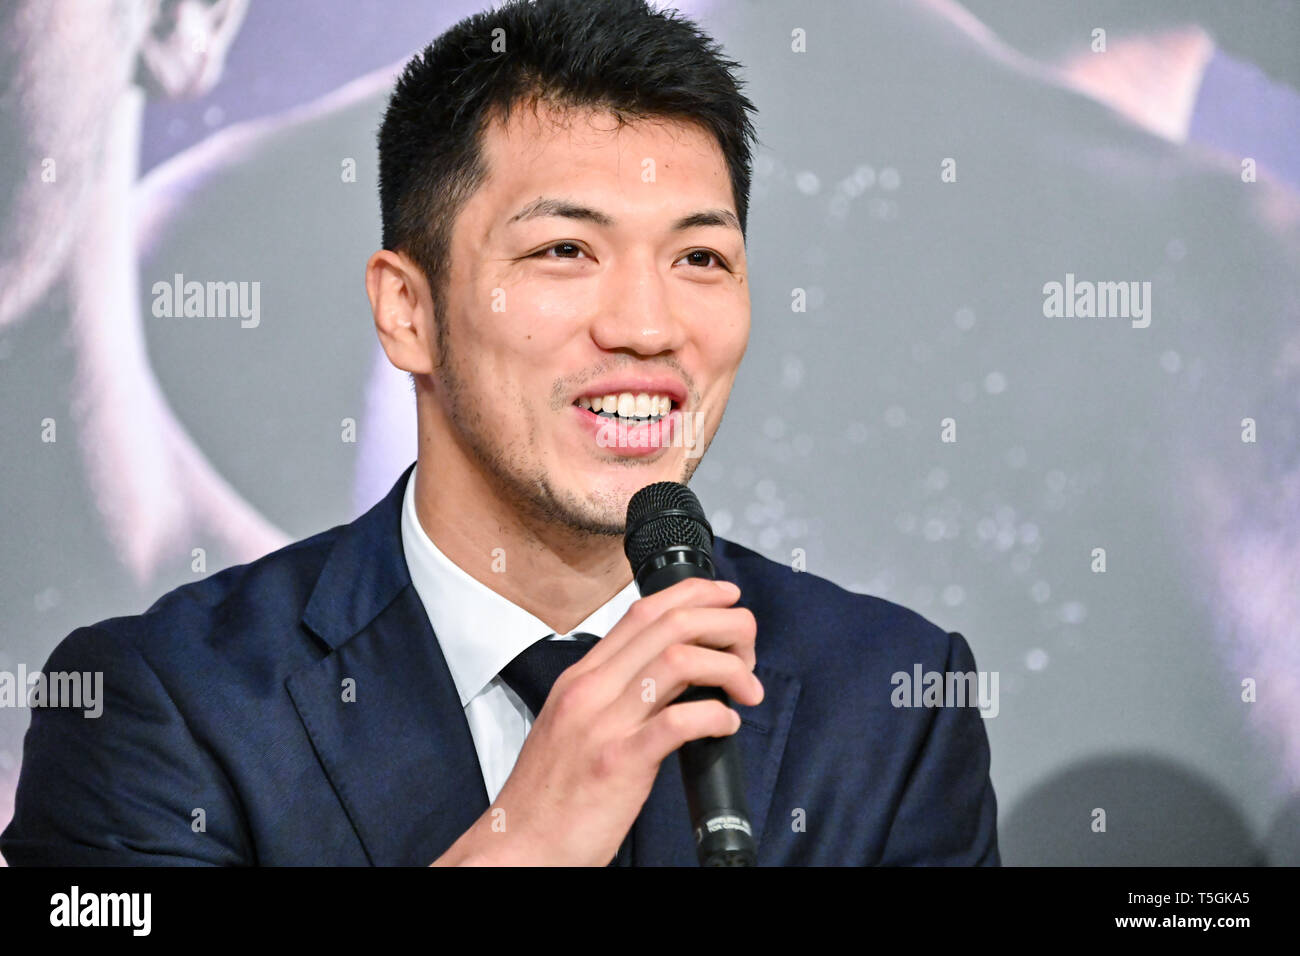 Tokyo, Japan. 25th Apr, 2019. Japan's Ryota Murata speaks at a press conference in Tokyo, Japan, April 25, 2019. Former WBA middleweight champion Murata will fight current title holder Rob Brant, on July 12 in Osaka, Japan. Credit: Hiroaki Yamaguchi/AFLO/Alamy Live News Stock Photo